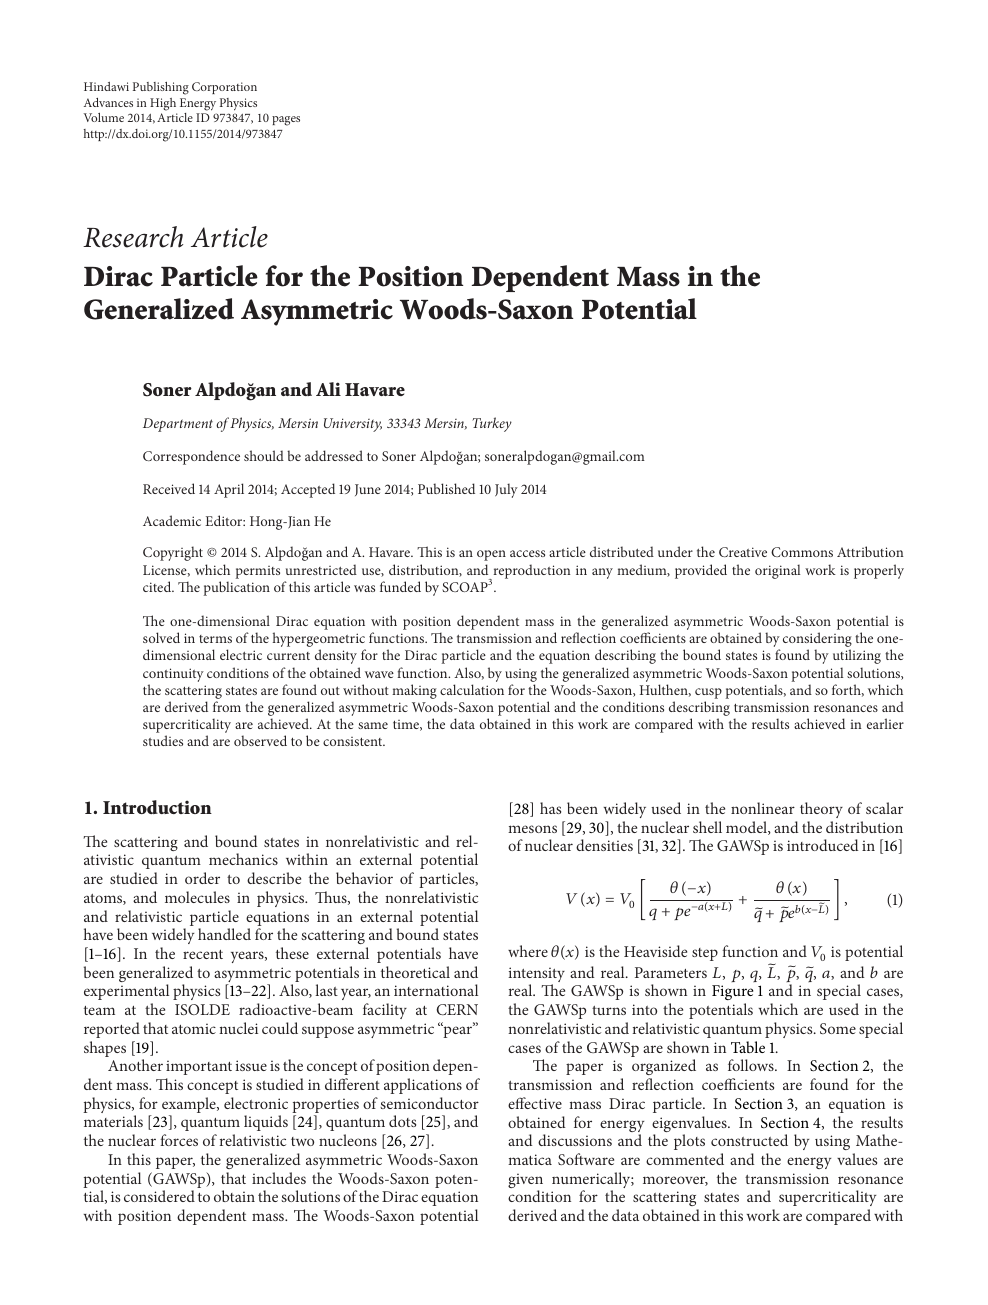 Dirac Particle For The Position Dependent Mass In The Generalized Asymmetric Woods Saxon Potential Topic Of Research Paper In Physical Sciences Download Scholarly Article Pdf And Read For Free On Cyberleninka Open